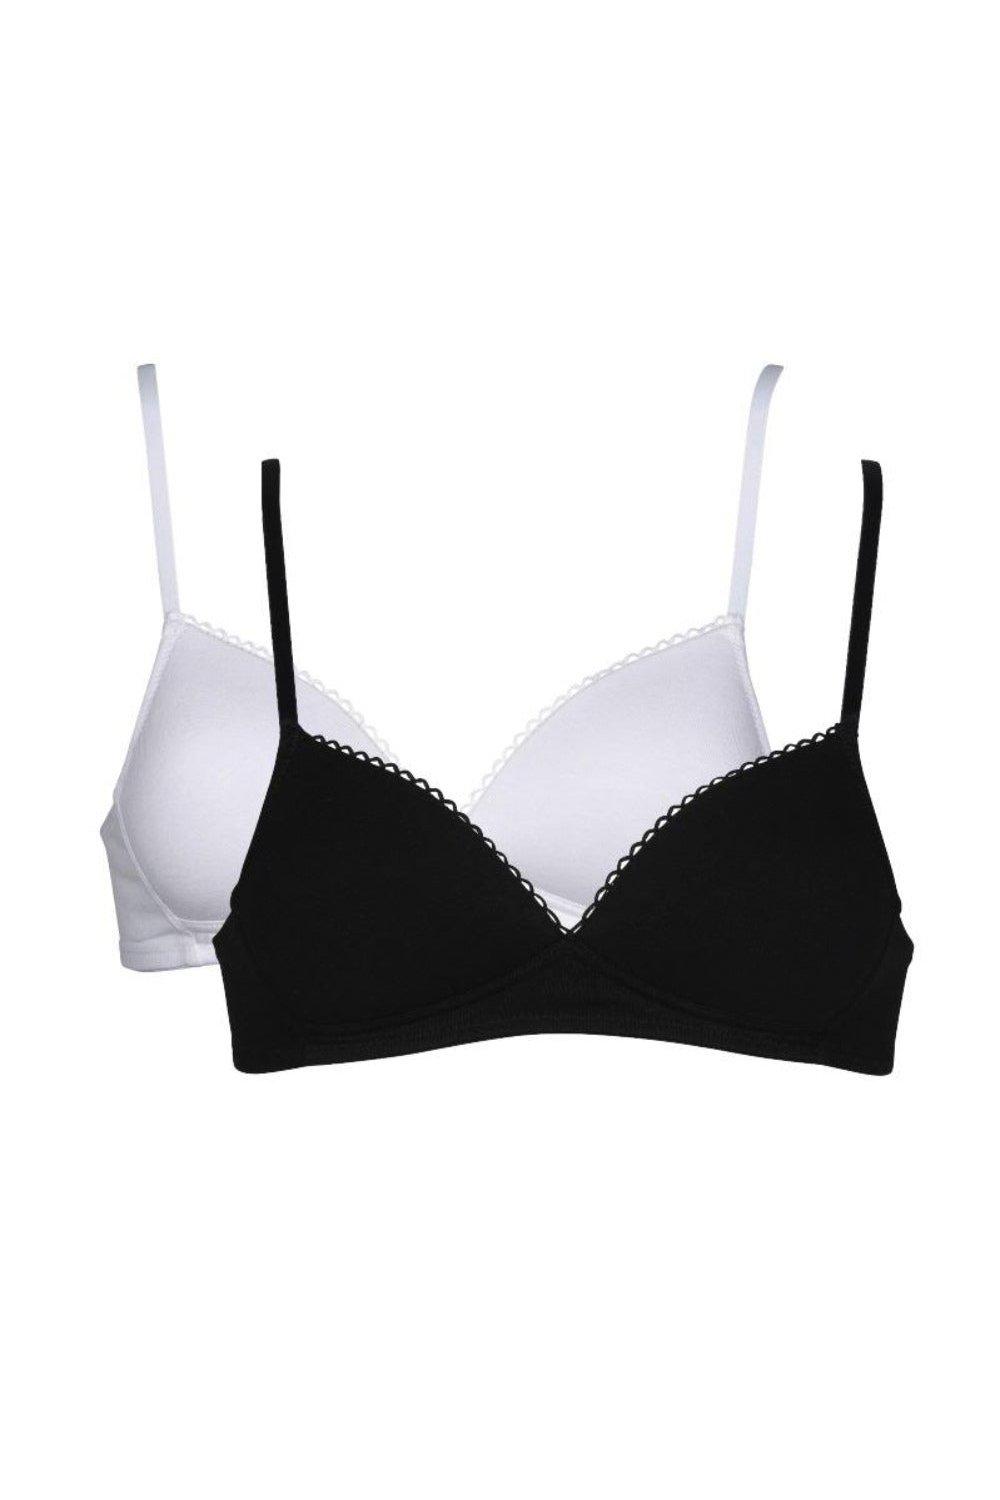 MyBasic Organic Cotton Non-Wired Comfy Bra Twin Pack